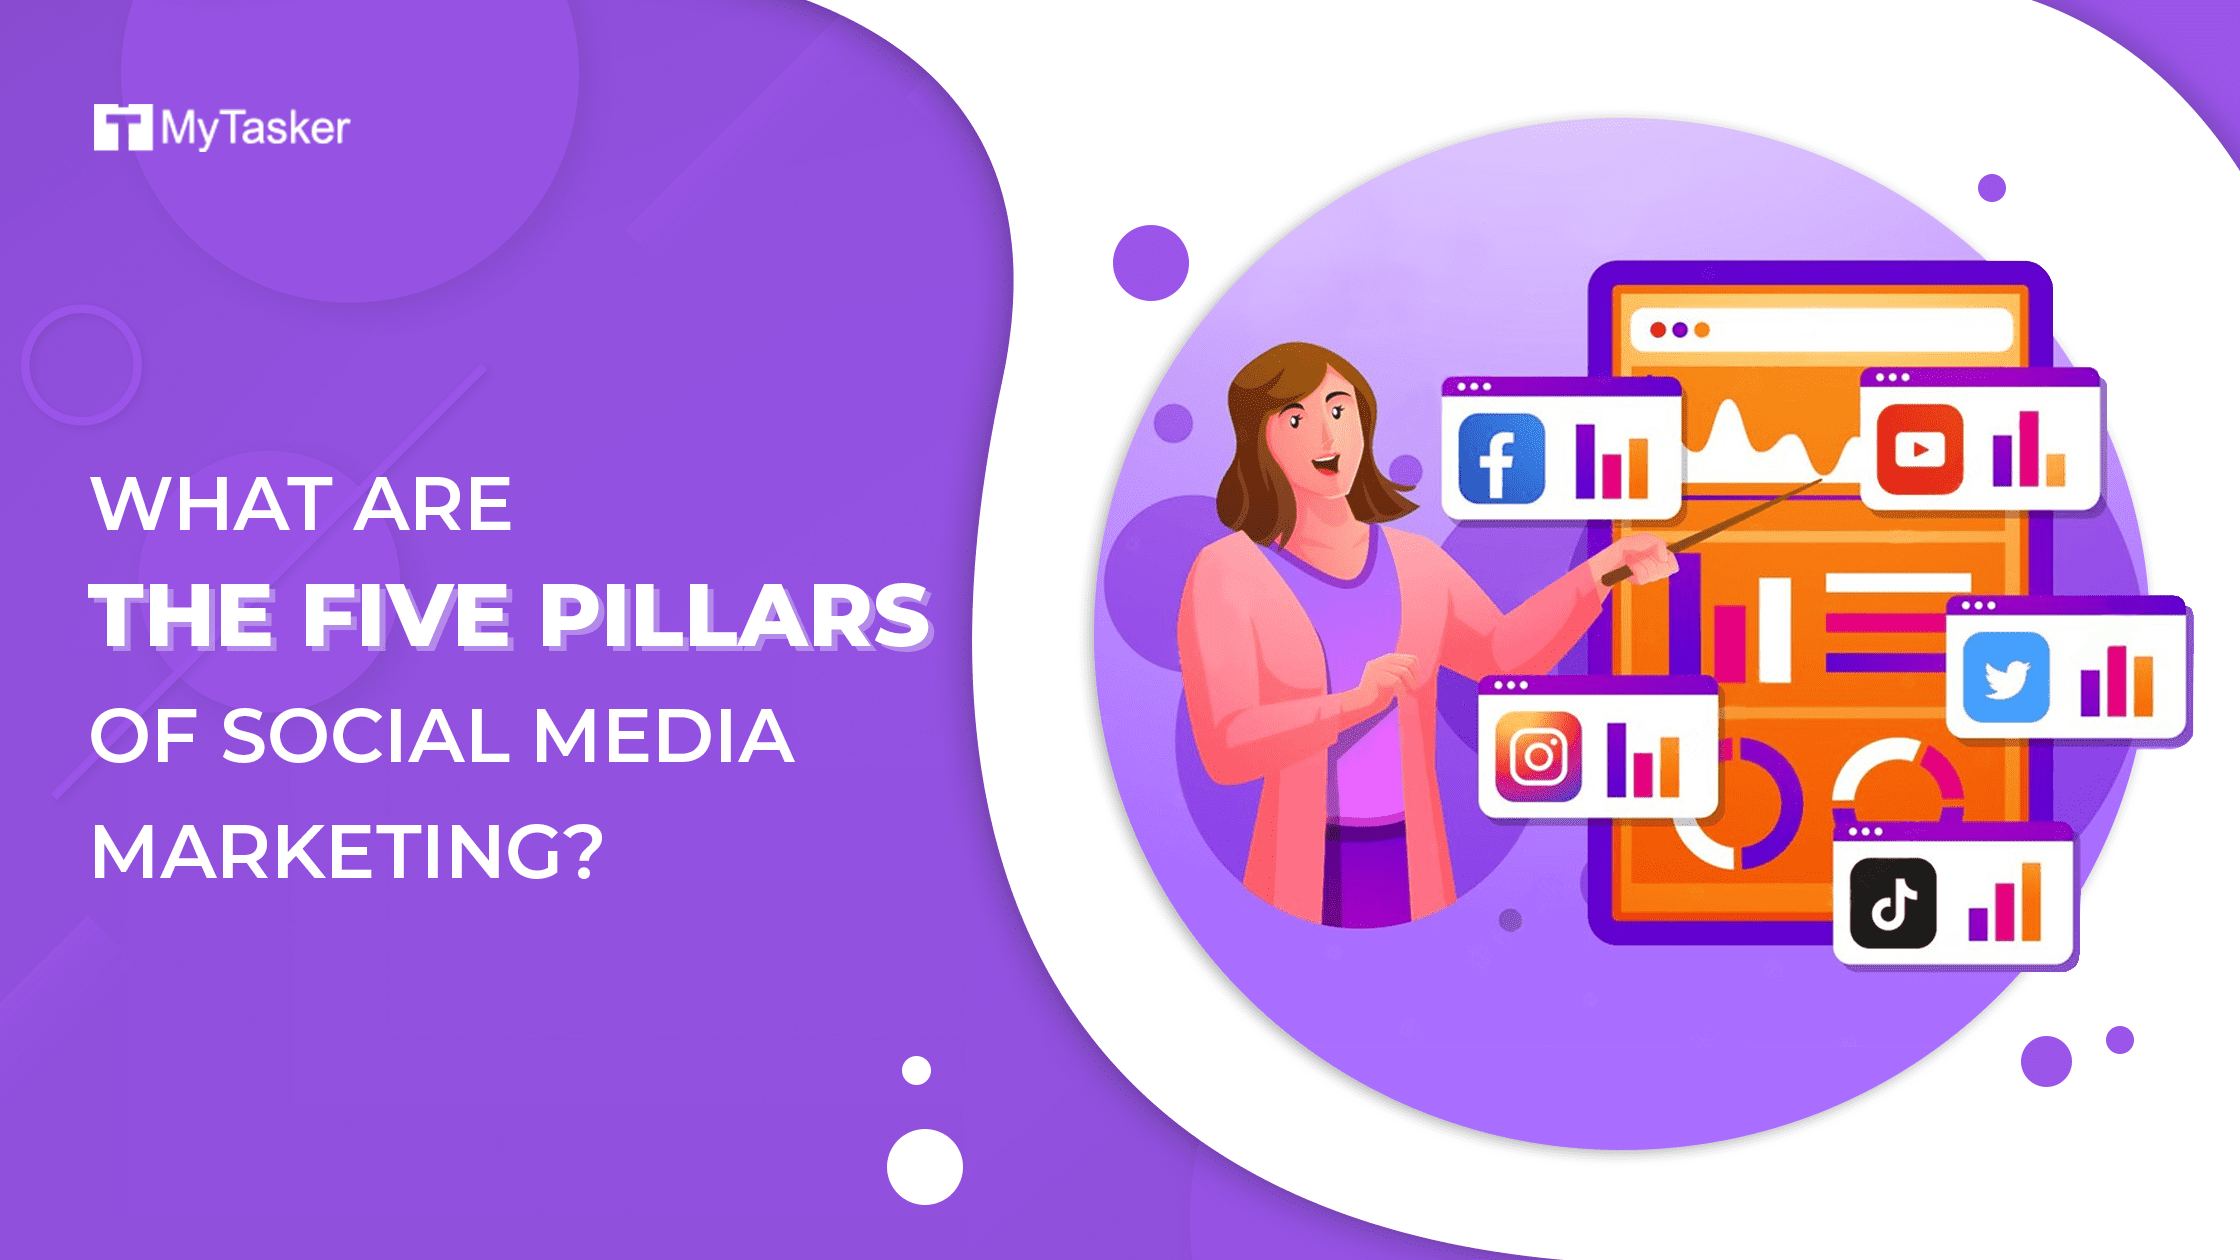 What Are the Five Pillars of Social Media Marketing?